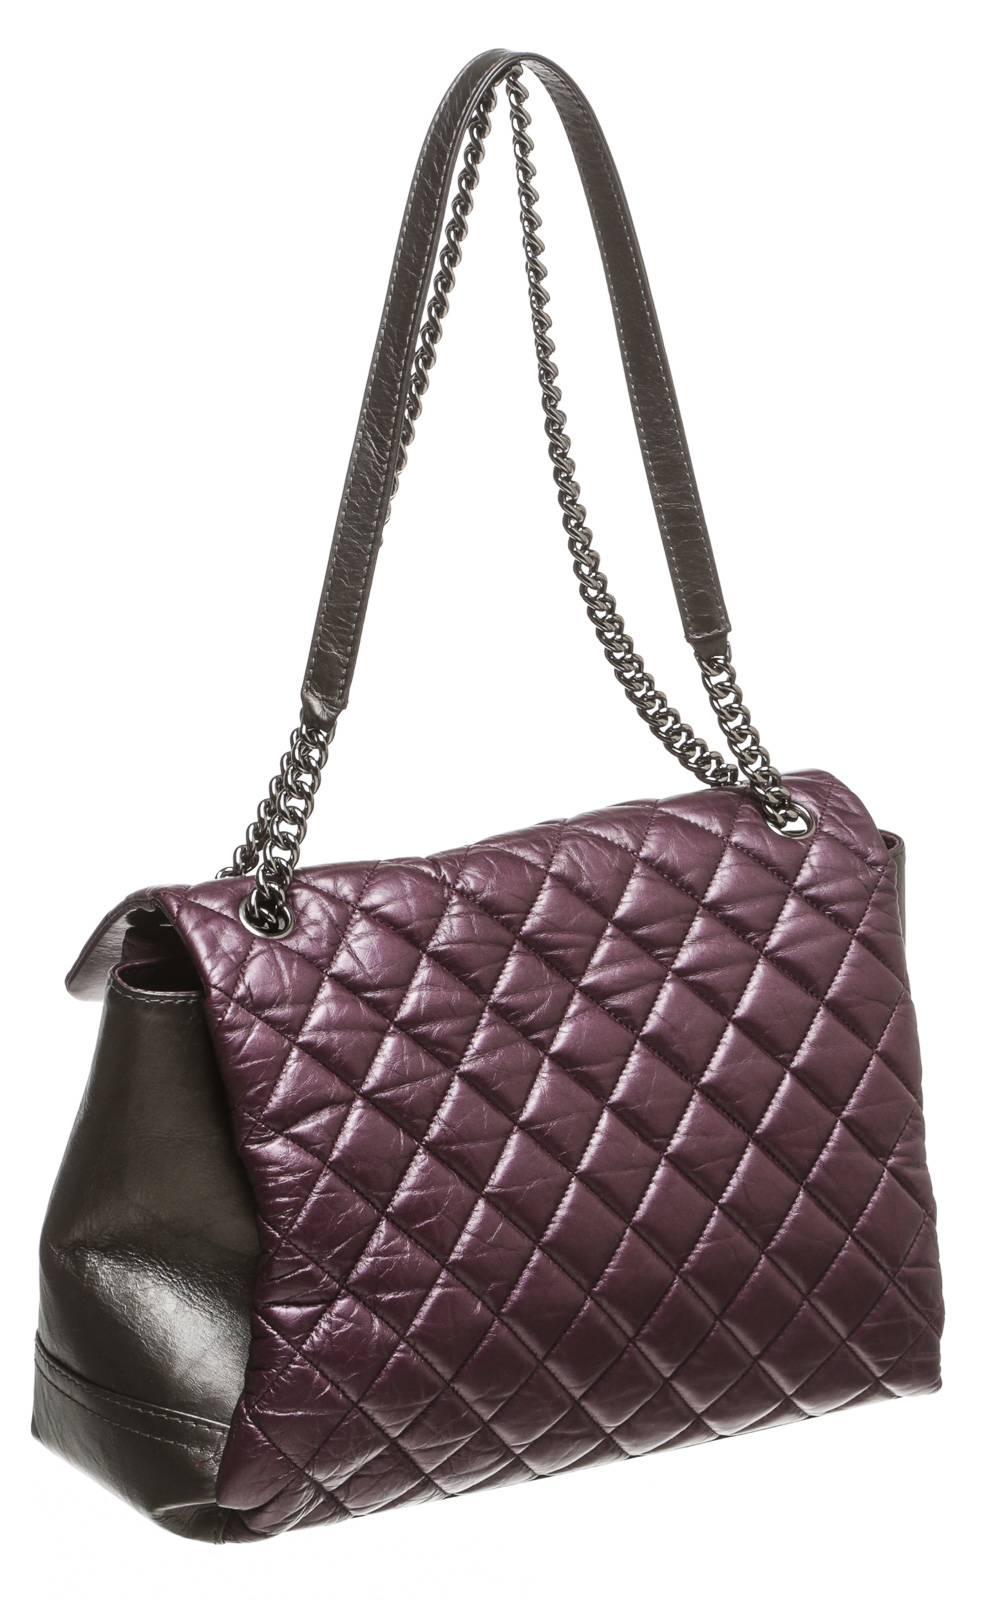 Chanel Purple and Gray Lambskin Lady Pearly Flap Handbag For Sale 1